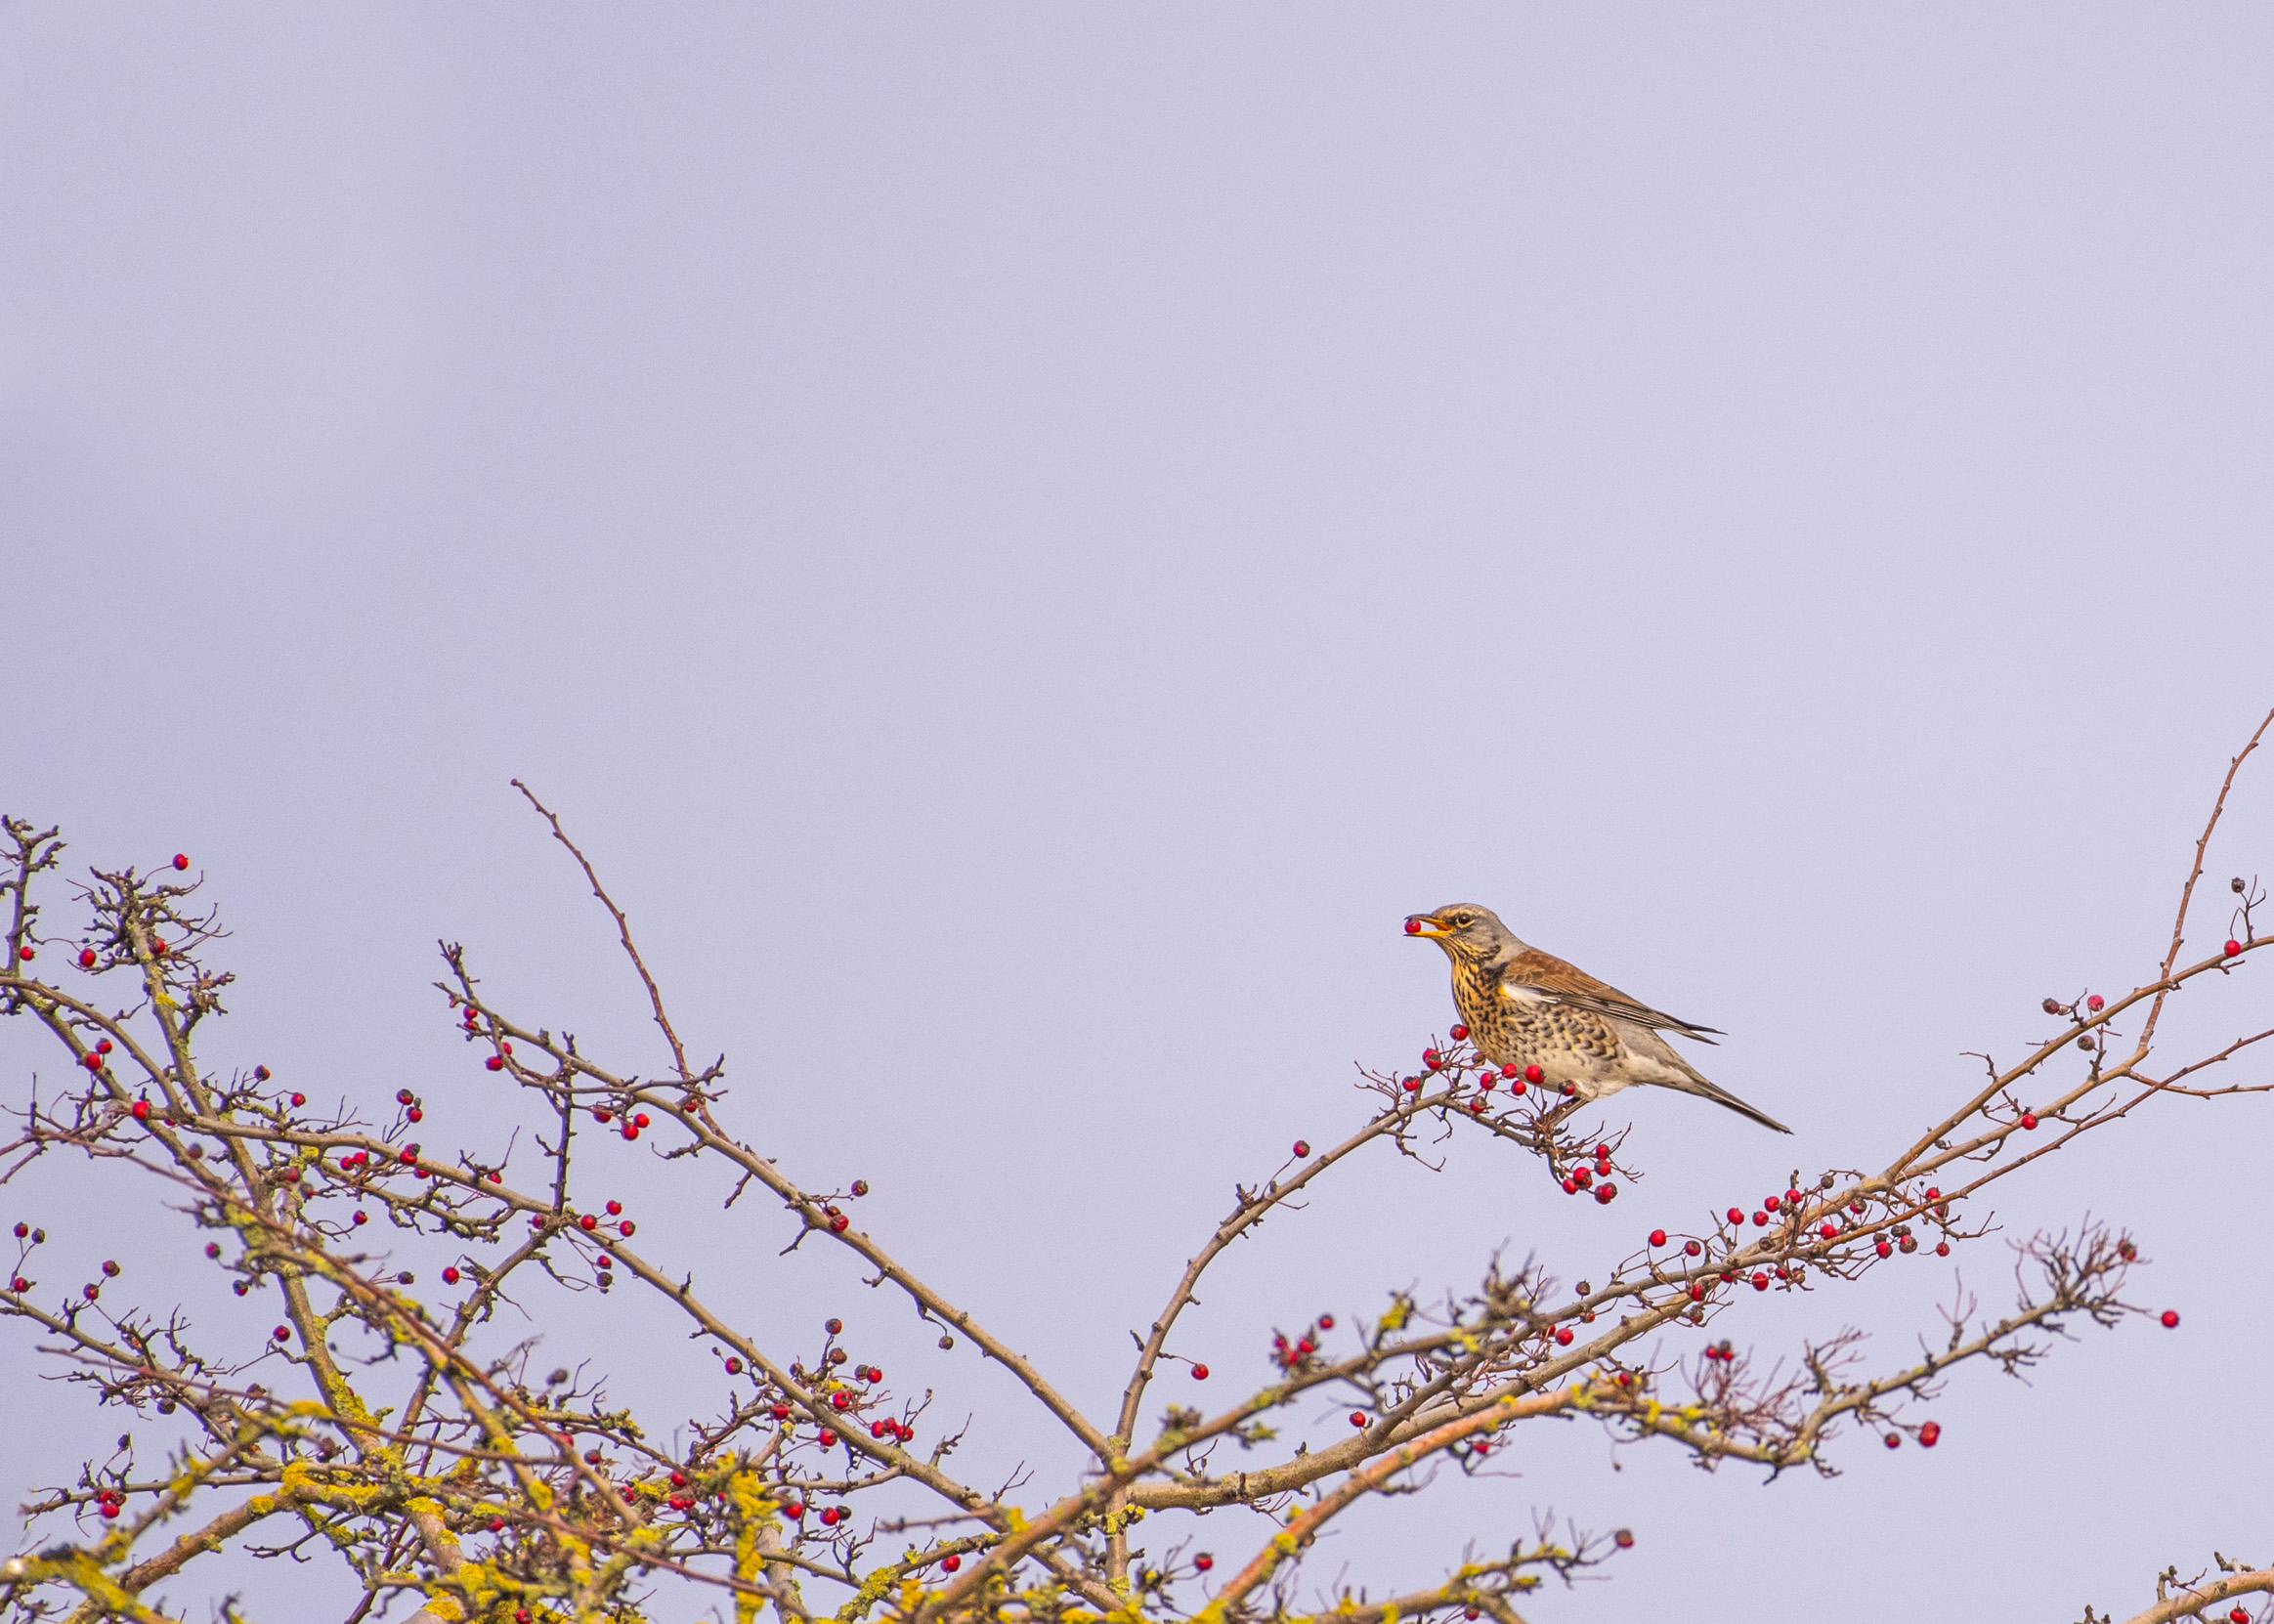 Fieldfare in winter, perched on top of a tree dotted with red berries.